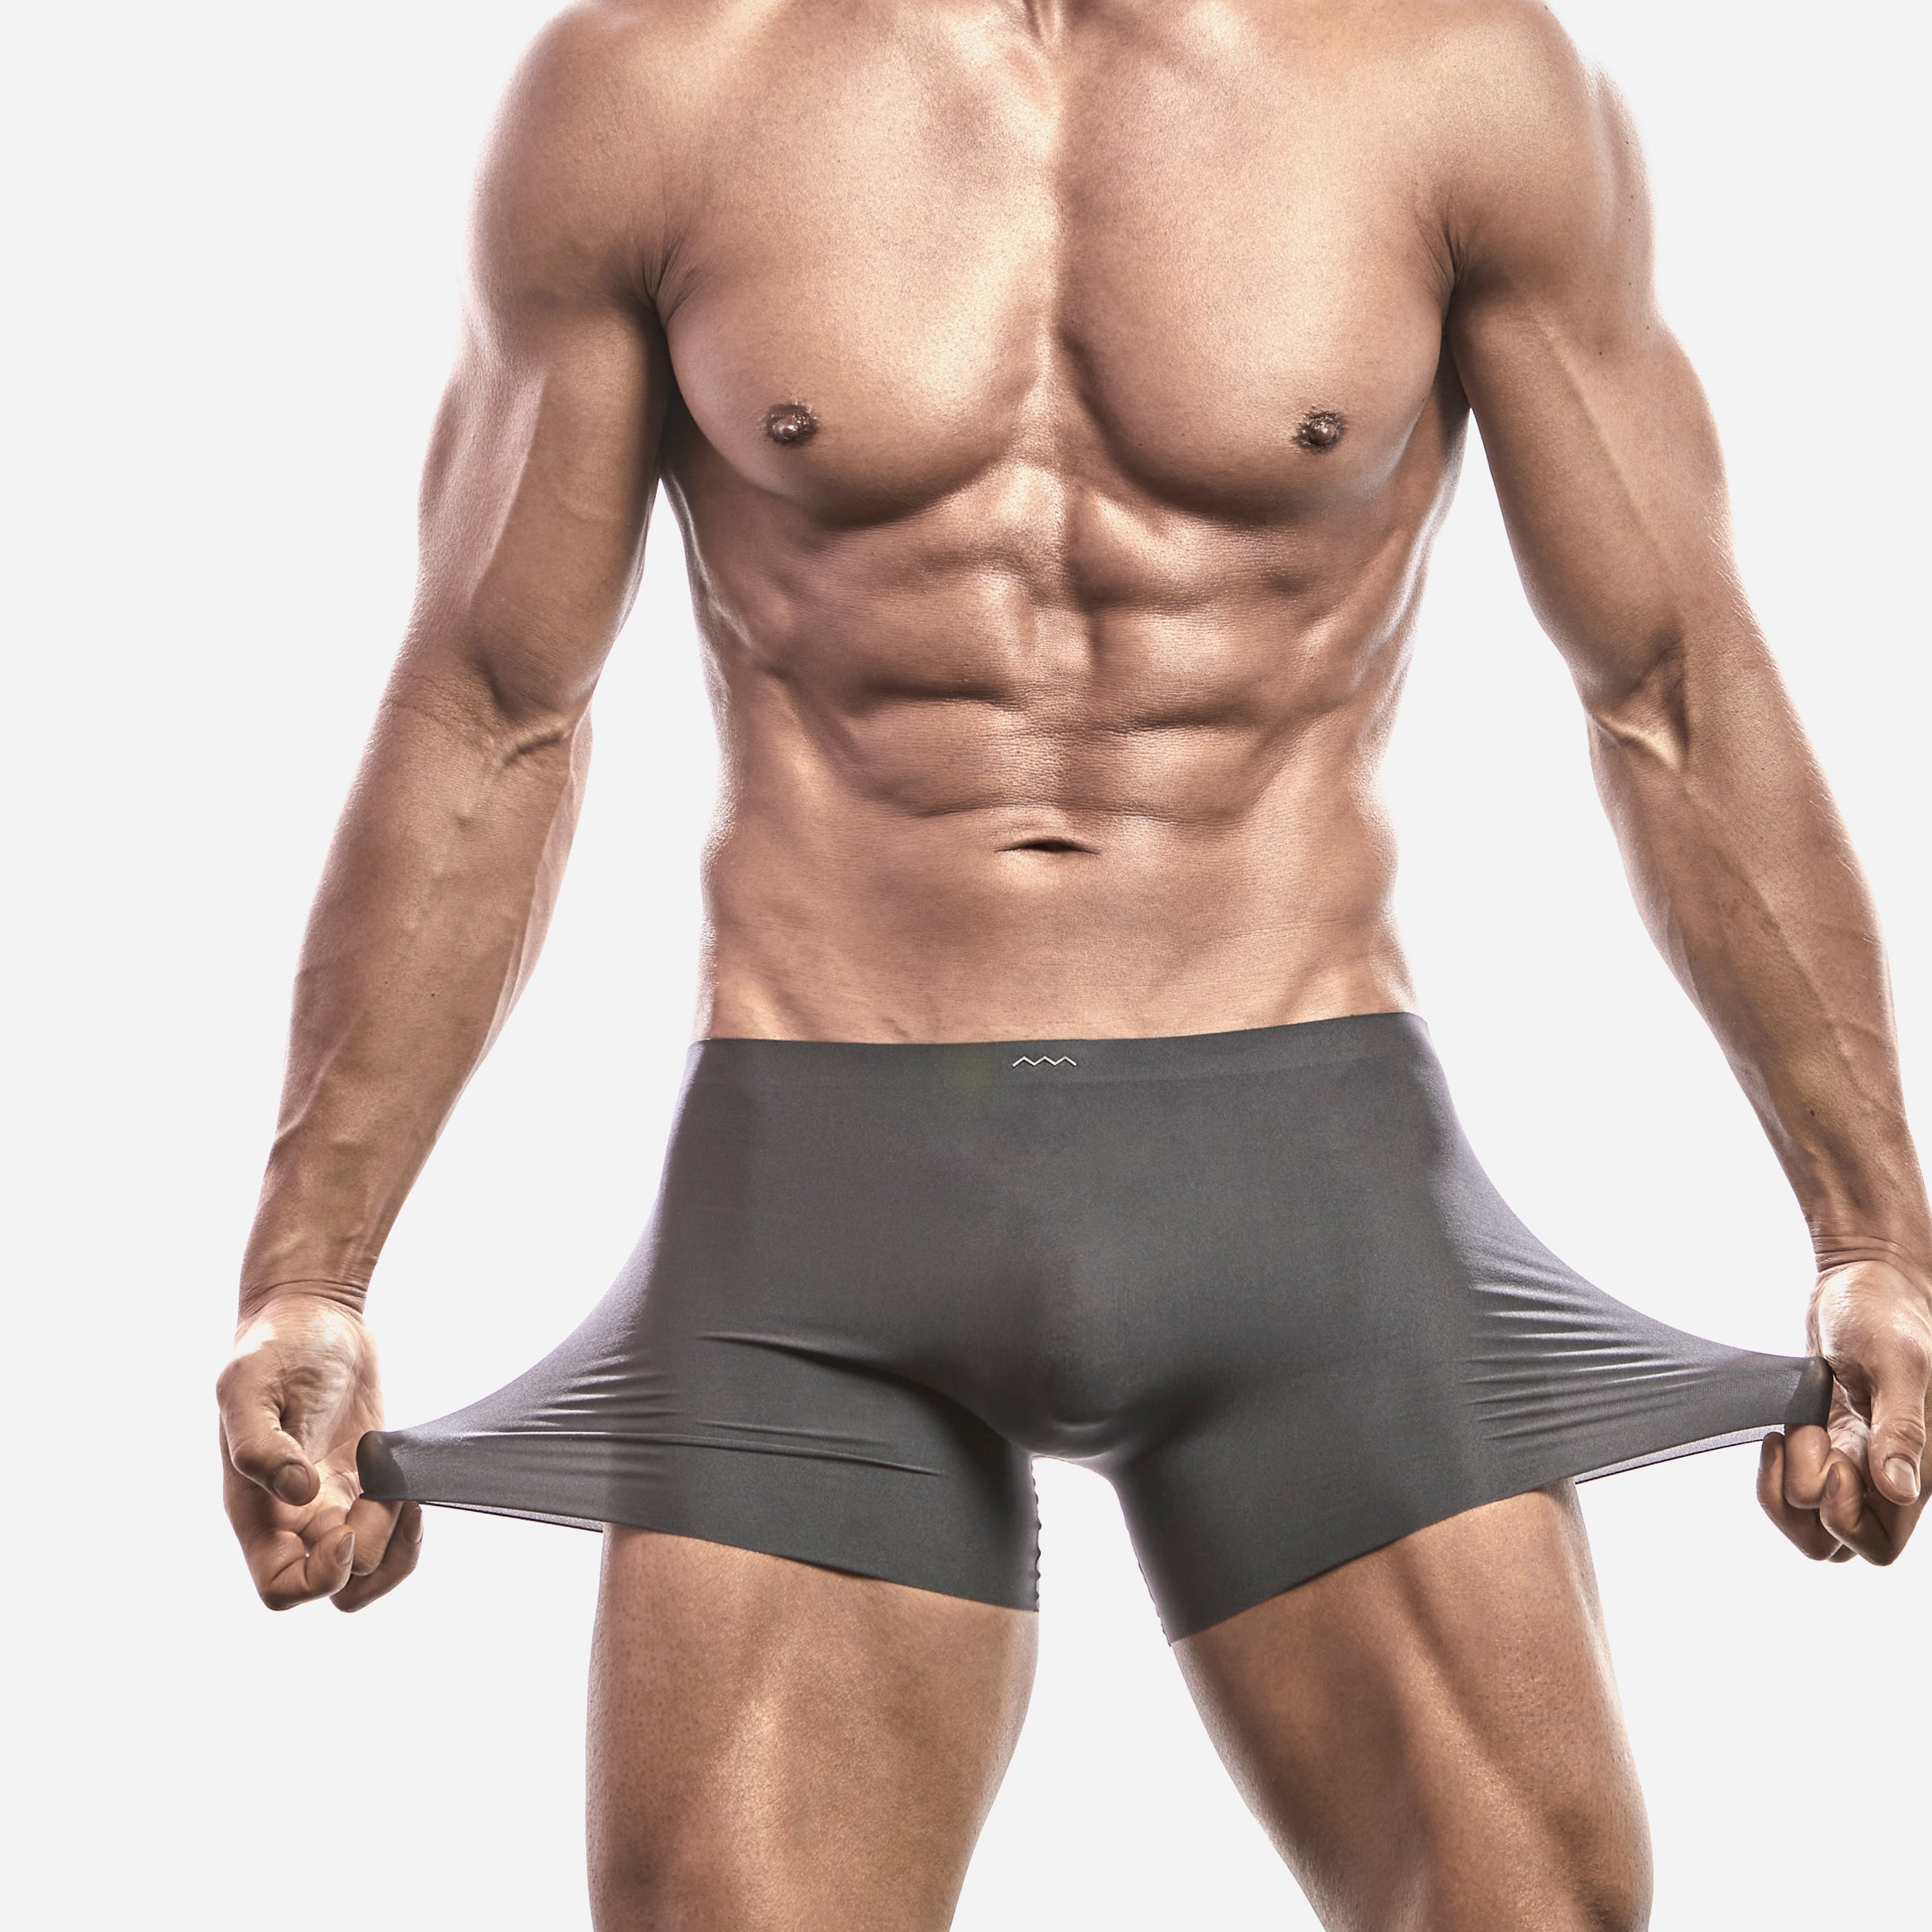 AsWeMove Men's underwear SPORT BRIEF VARIOUS COLORS AND SIZES